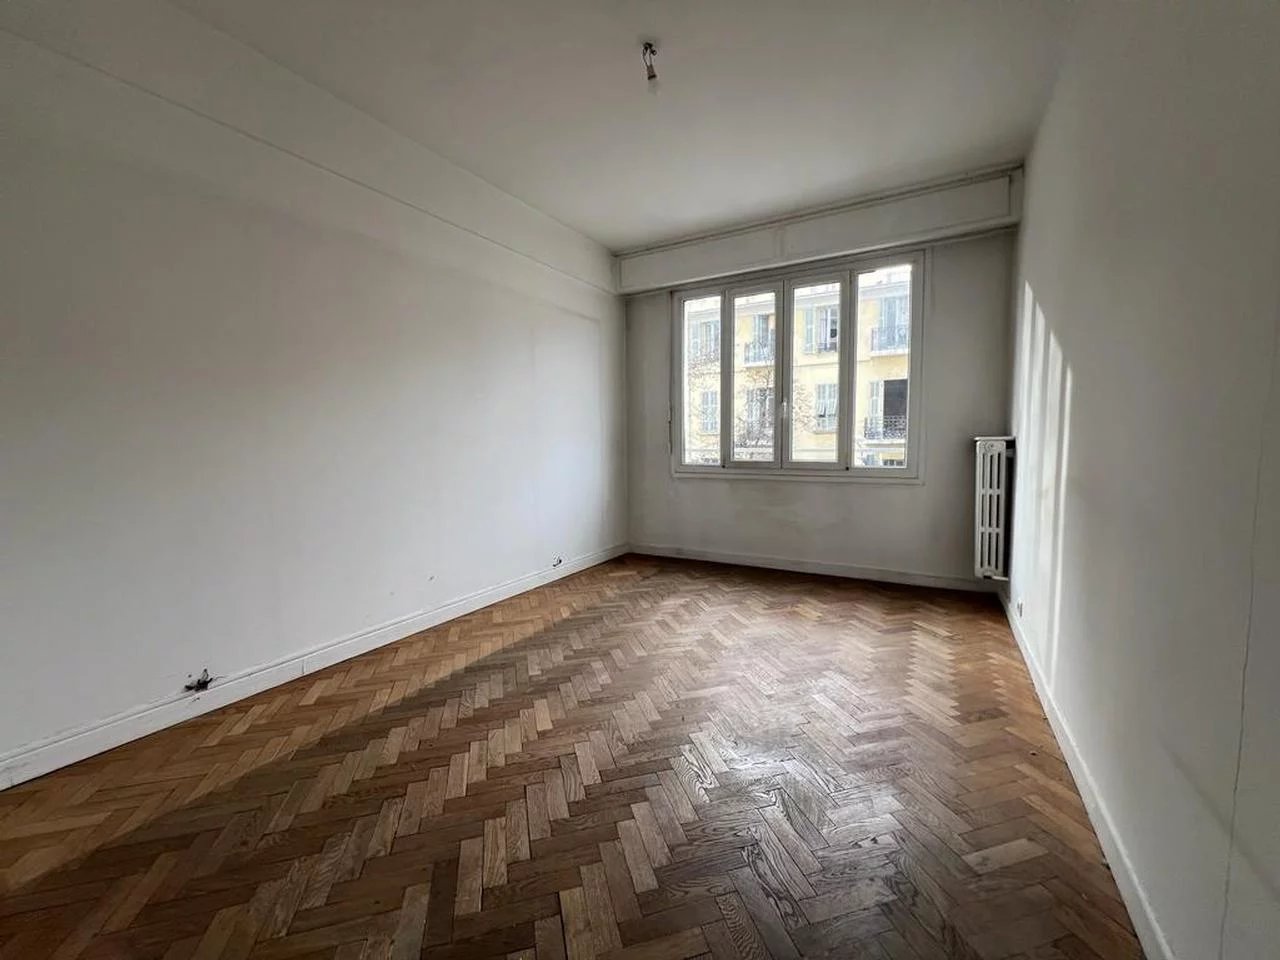 Appartement  2 Rooms 53m2  for sale   235 000 €